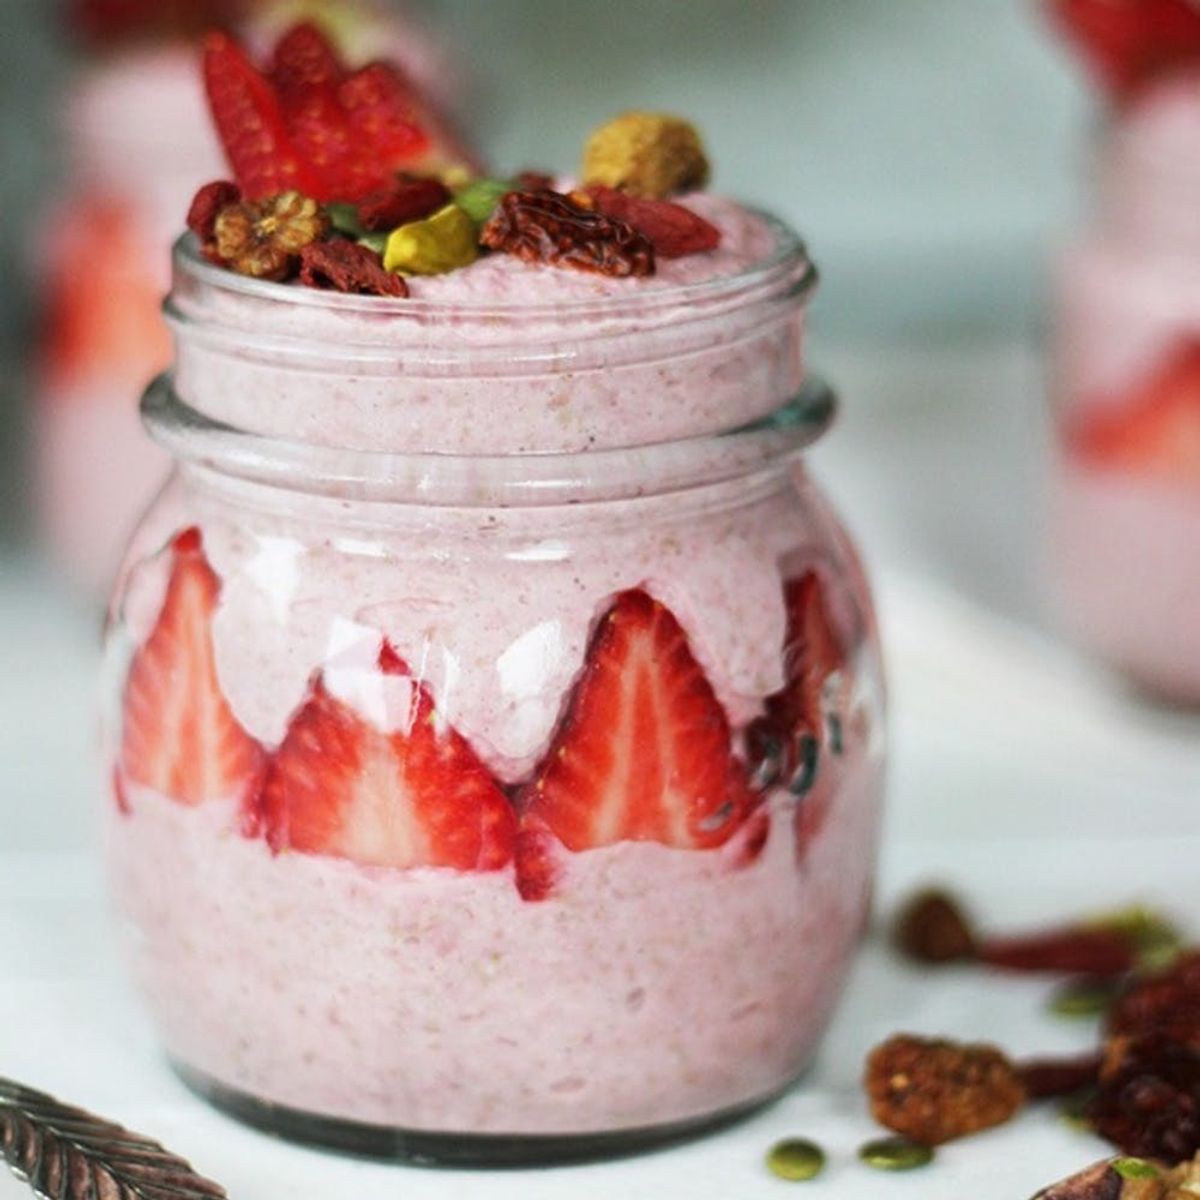 5 Healthy + Delicious Breakfast Recipes to Start Your Day Right